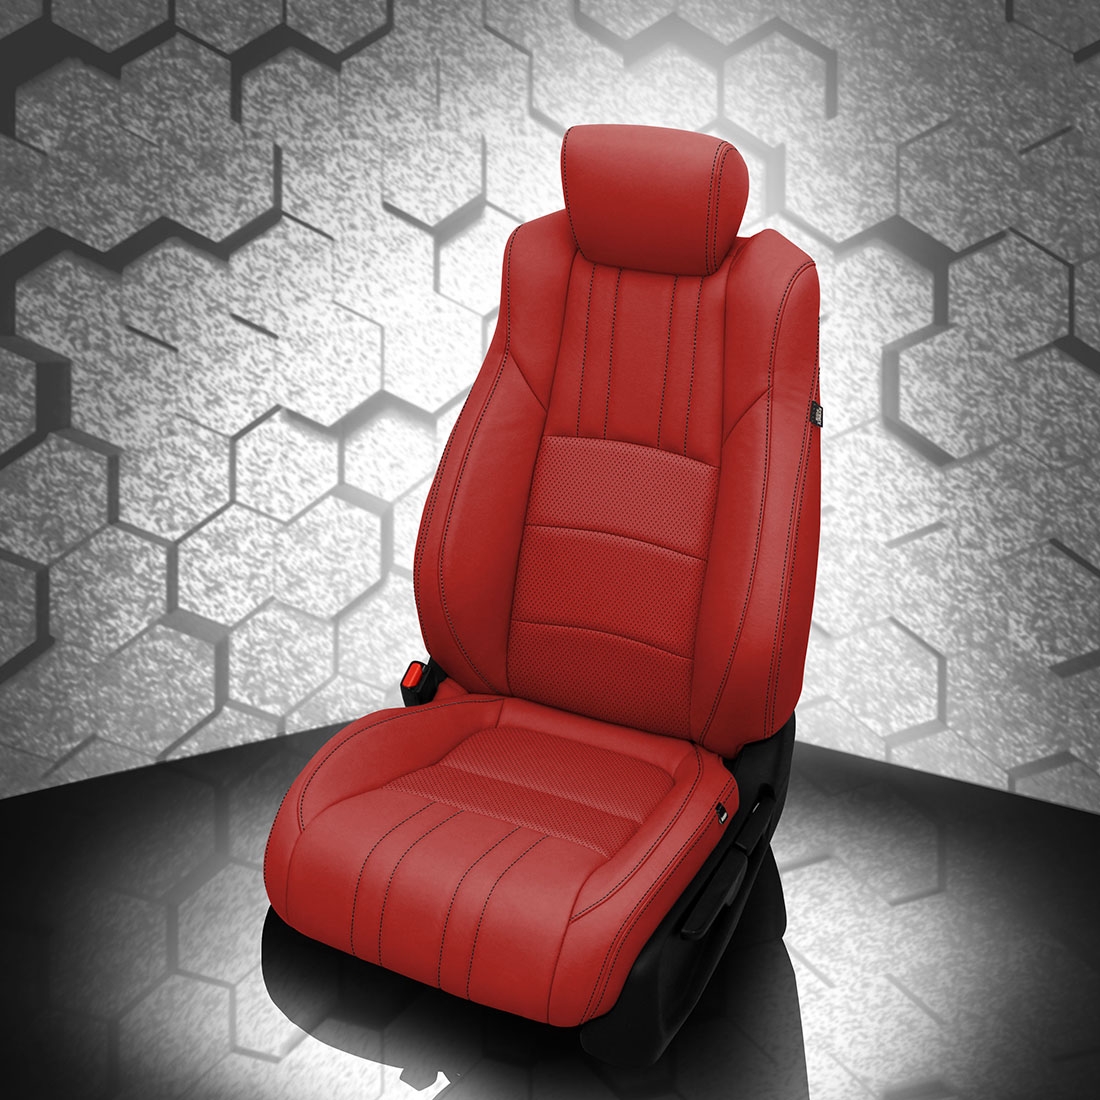 Honda Accord Bright Red Leather Seats